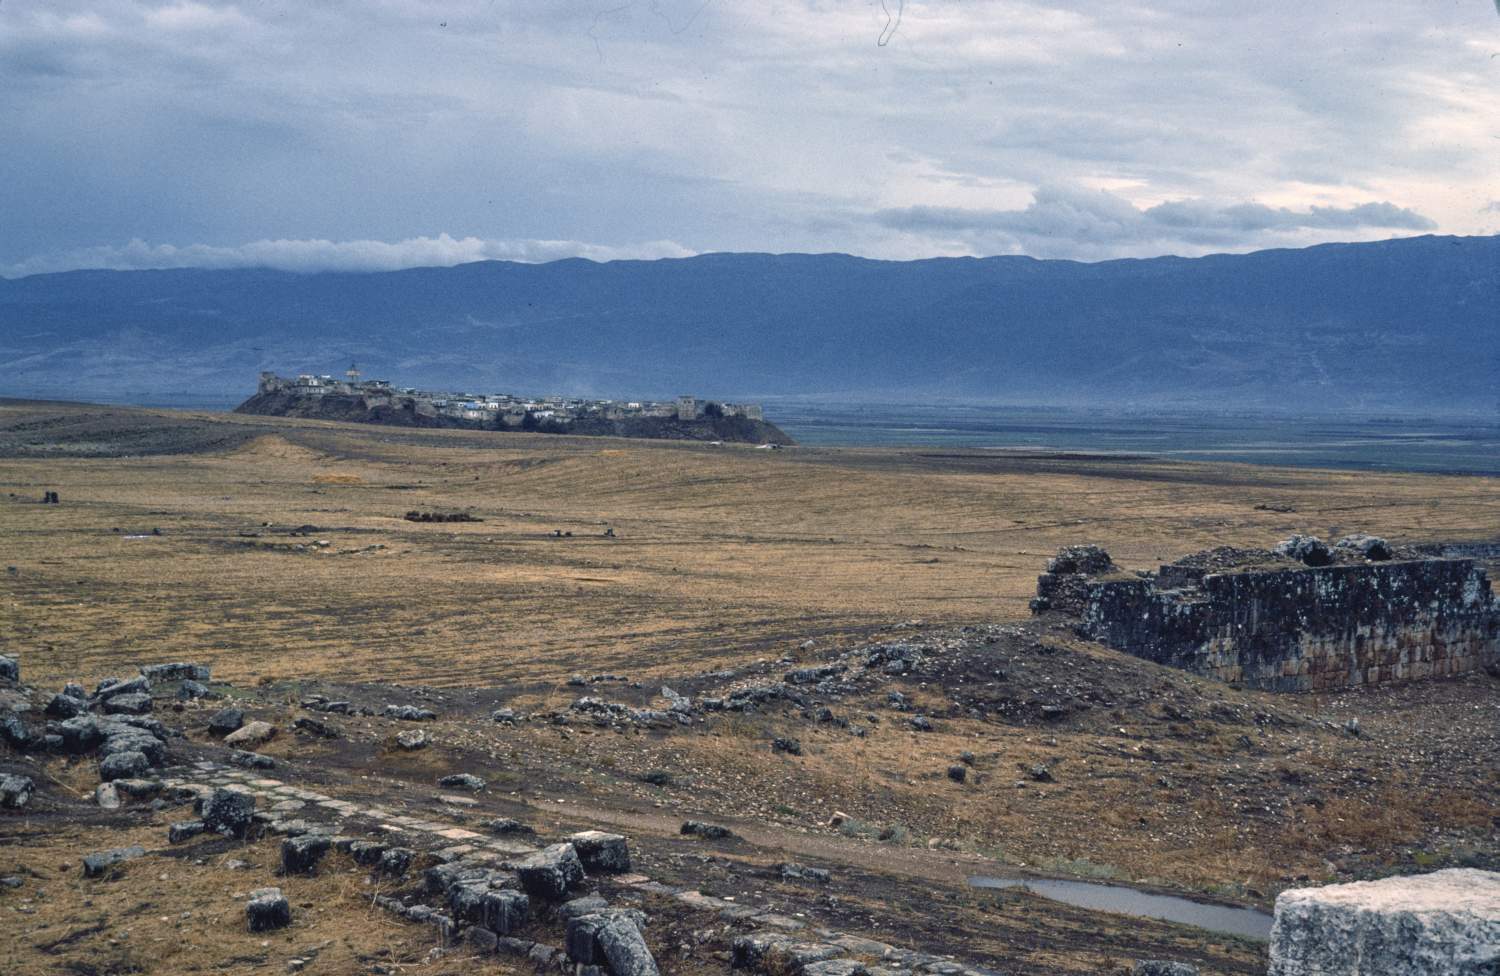 General view over site looking west toward Ghab Valley and Ansariyya Mountains, with hilltop village of Qal'at al-Mudiq visible.